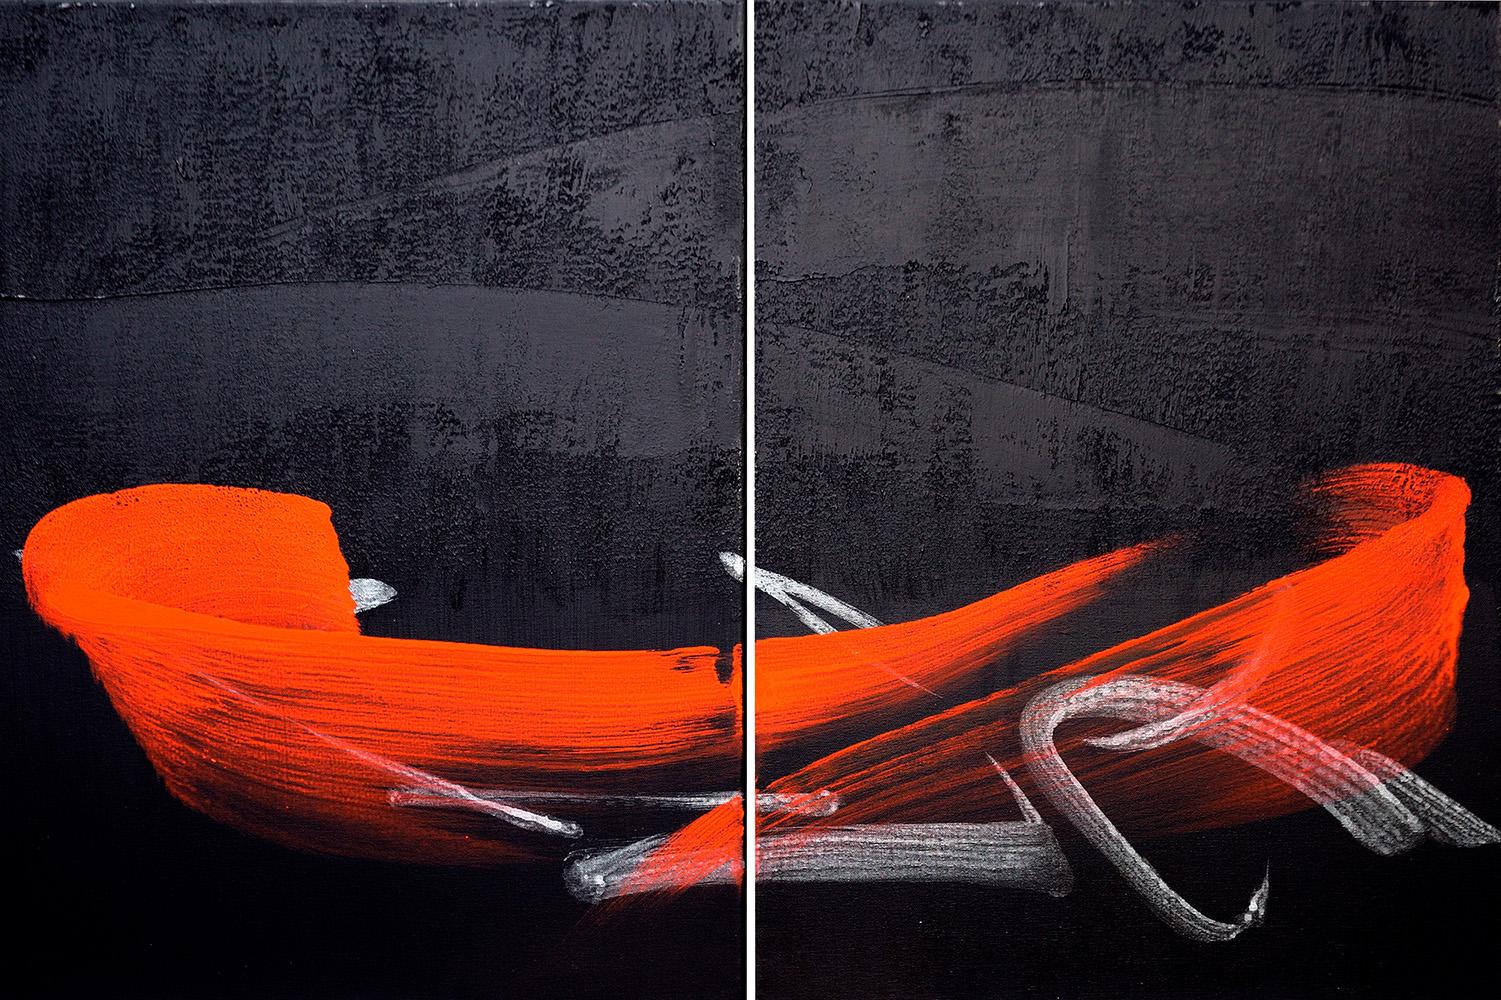 TN696-D is a unique diptych painting by Japanese contemporary artist Hachiro Kanno. The painting is made with ink and acrylic on canvas, dimensions are 70 × 100 cm (27.6 × 39.4 in). This diptych artwork is composed of two paintings each measuring: